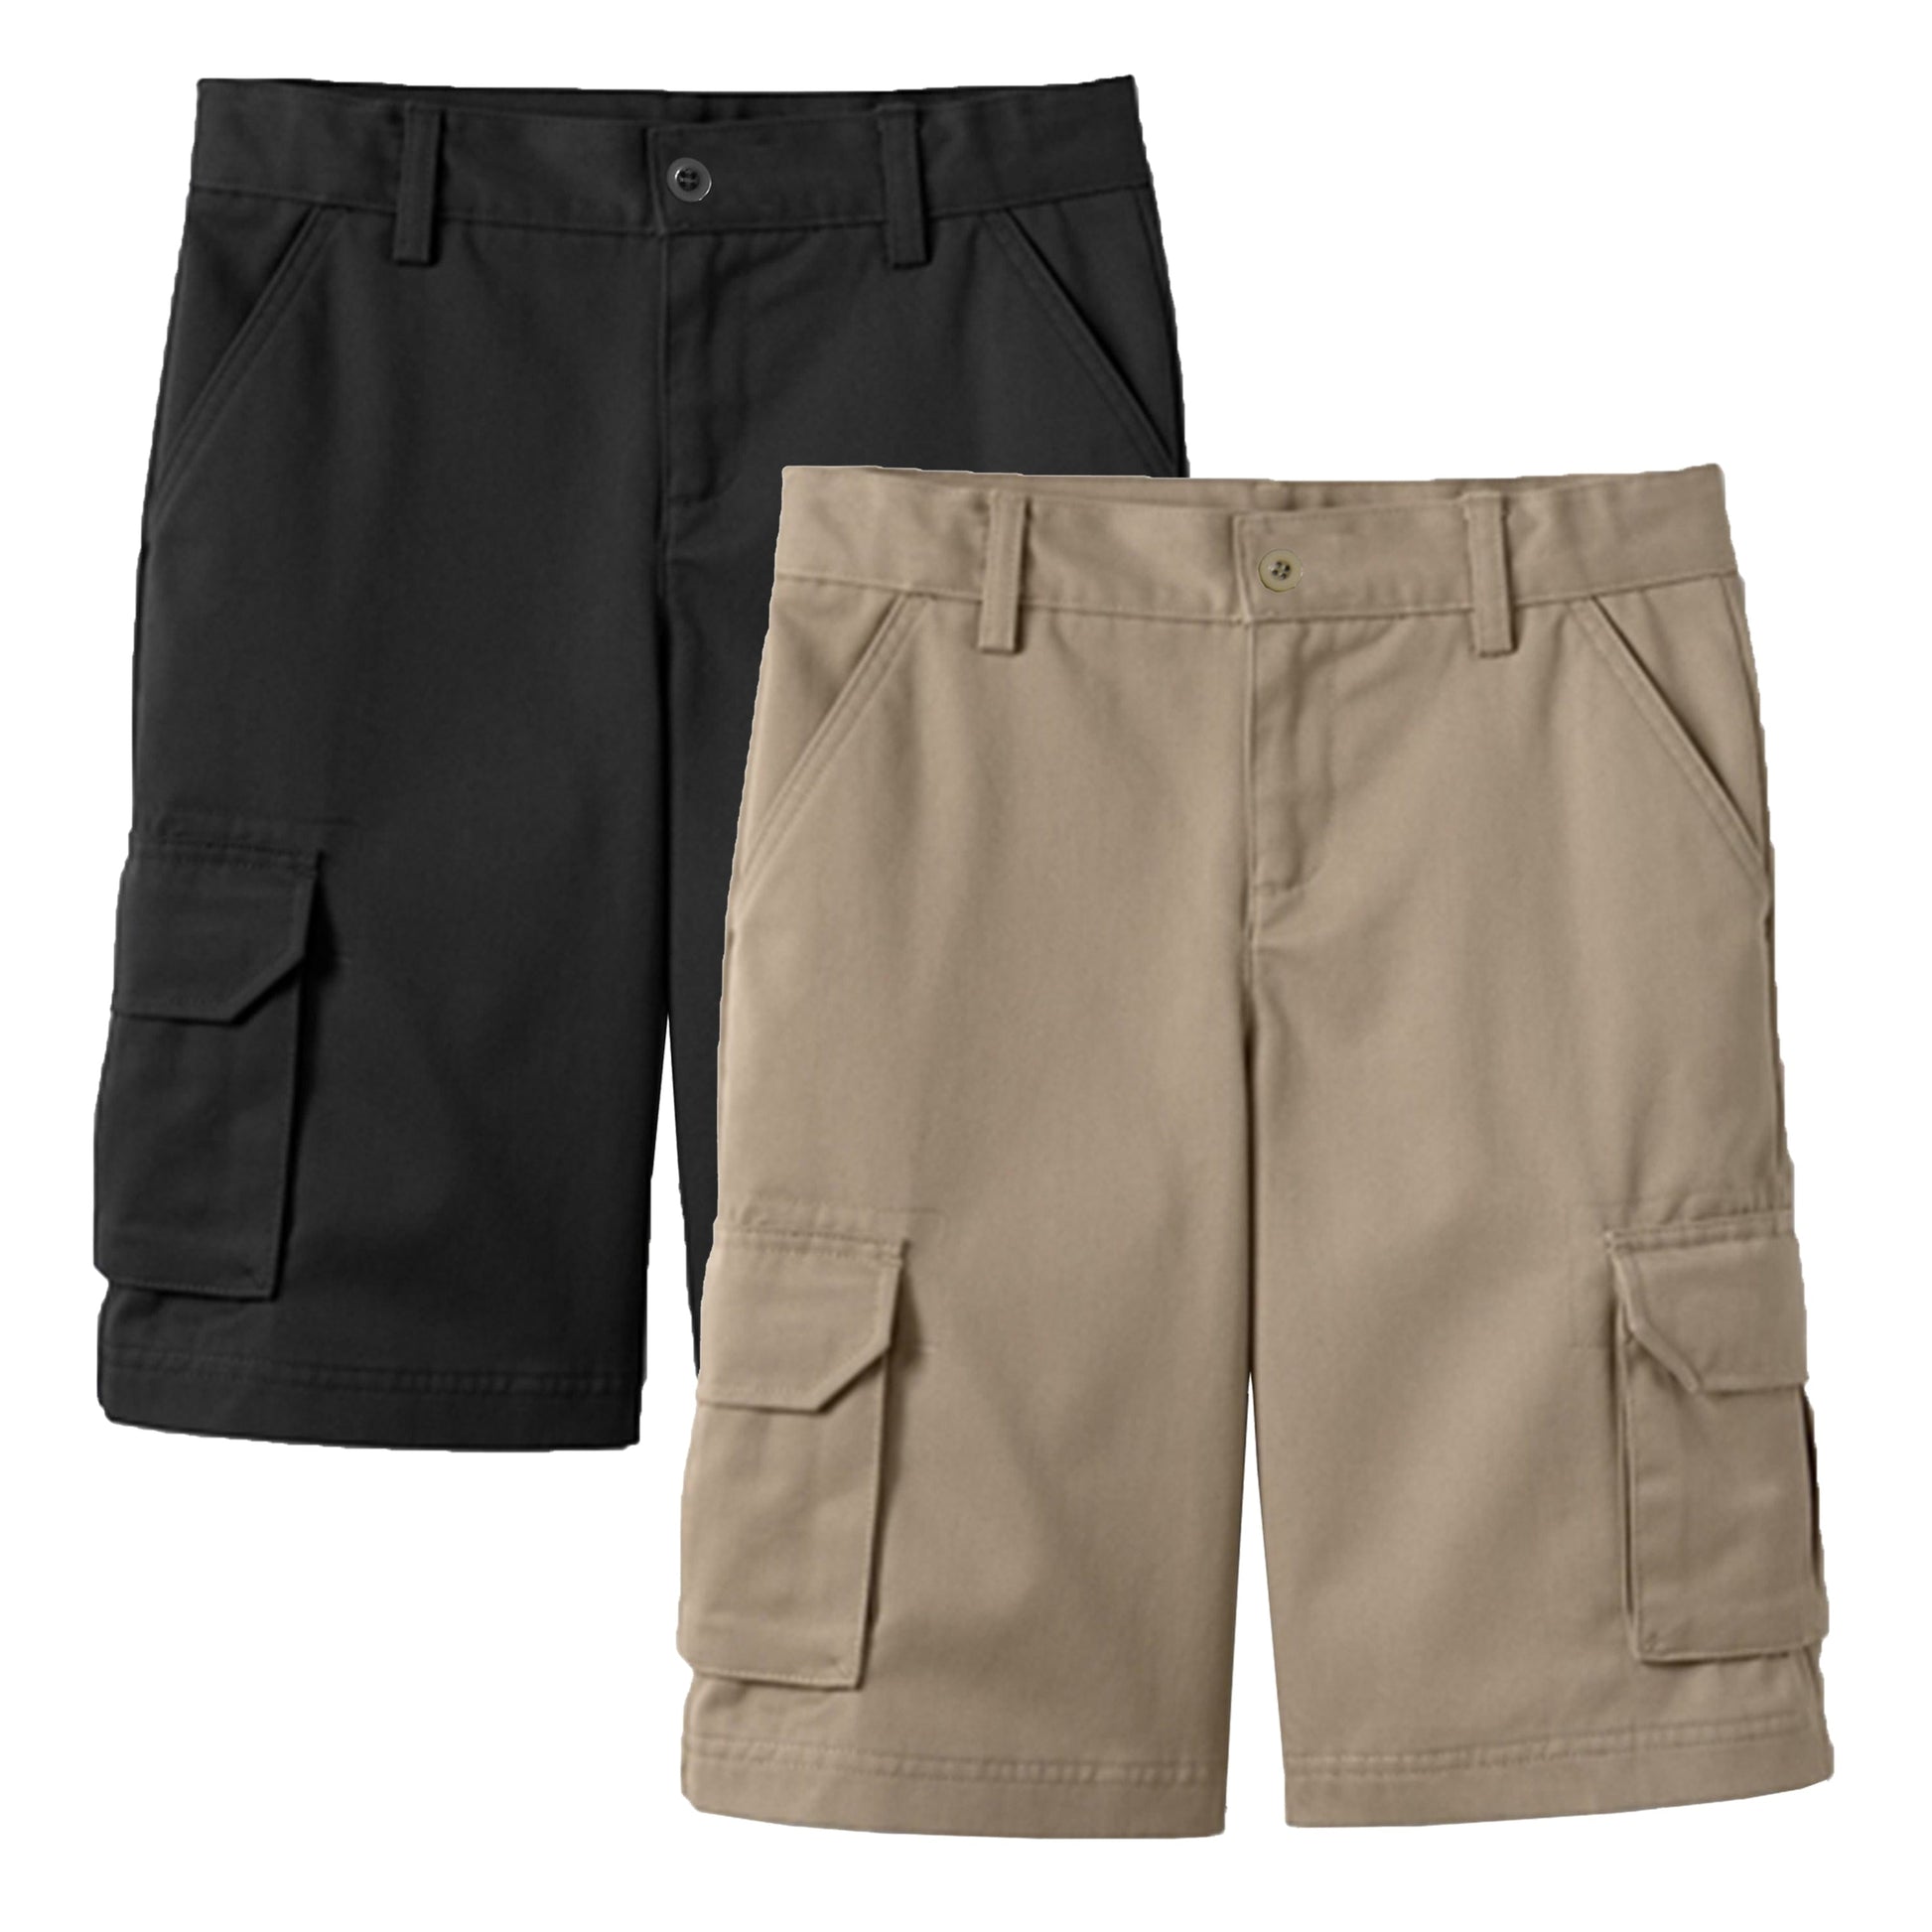 2-Pack Boy's Stretch Cotton Cargo Shorts (Sizes, 8-18) - GalaxybyHarvic